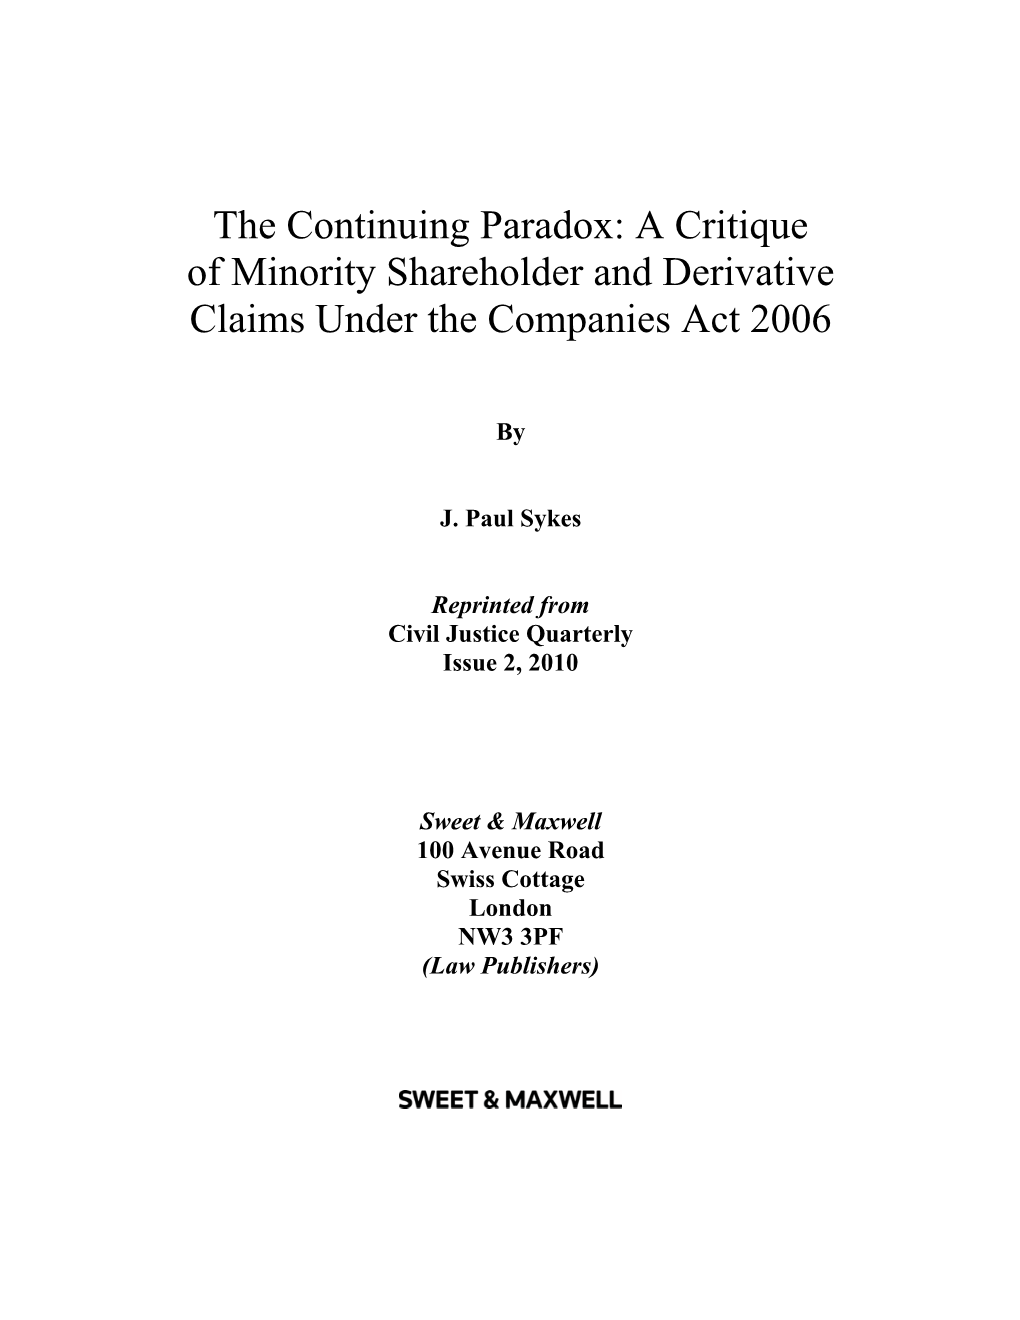 The Continuing Paradox: a Critique of Minority Shareholder and Derivative Claims Under the Companies Act 2006